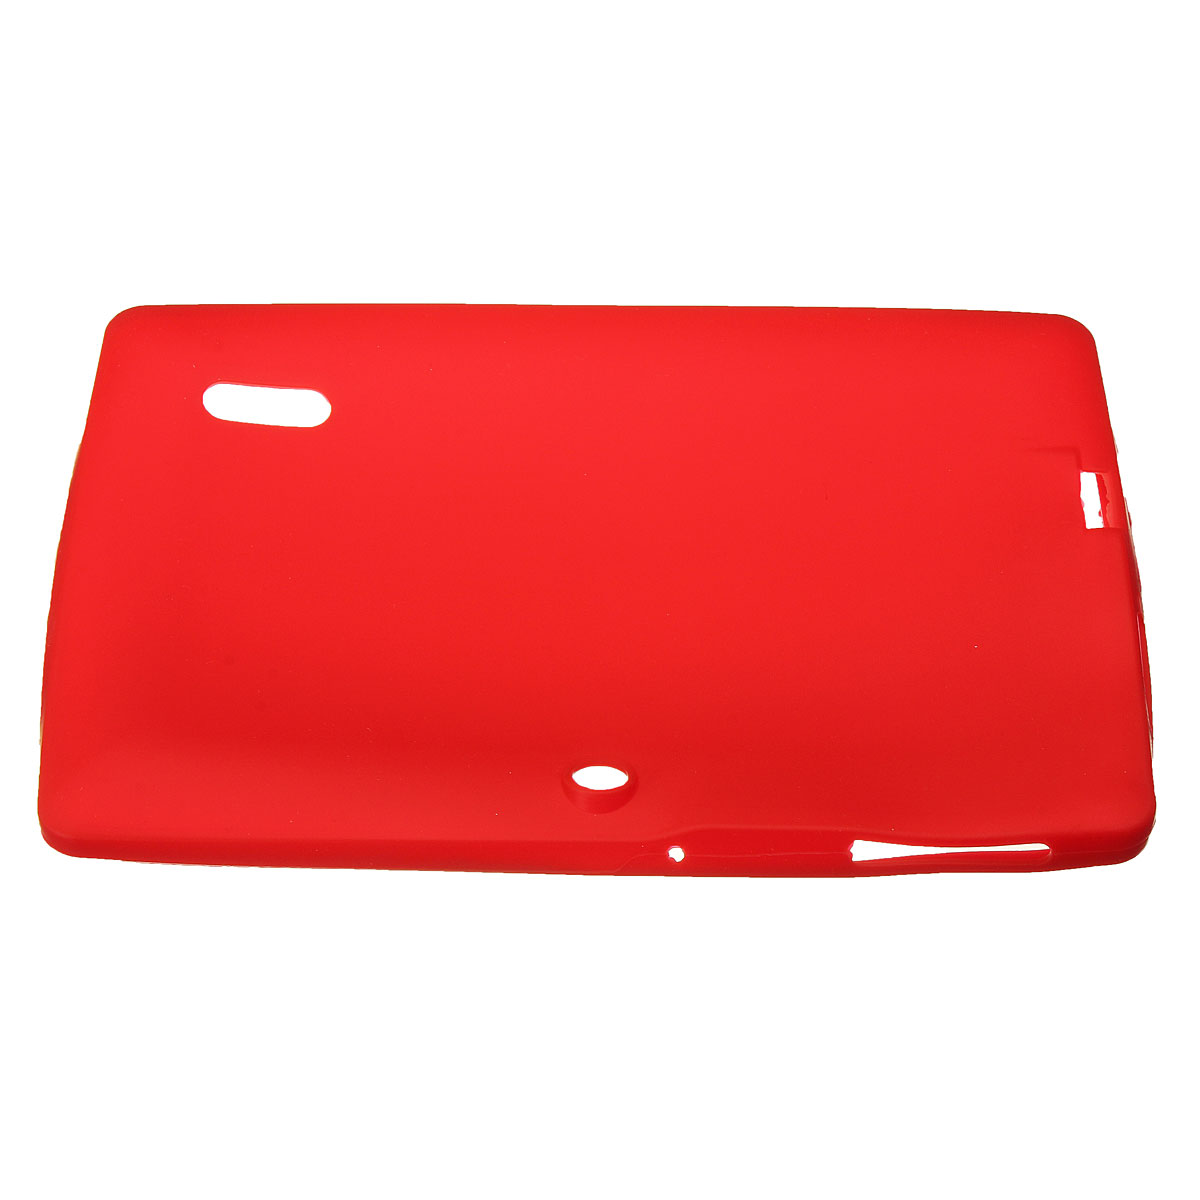 Multi-color-Soft-Silicone-Protective-Back-Cover-Case-For-7-Inch-Tablet-PC-1974994-5